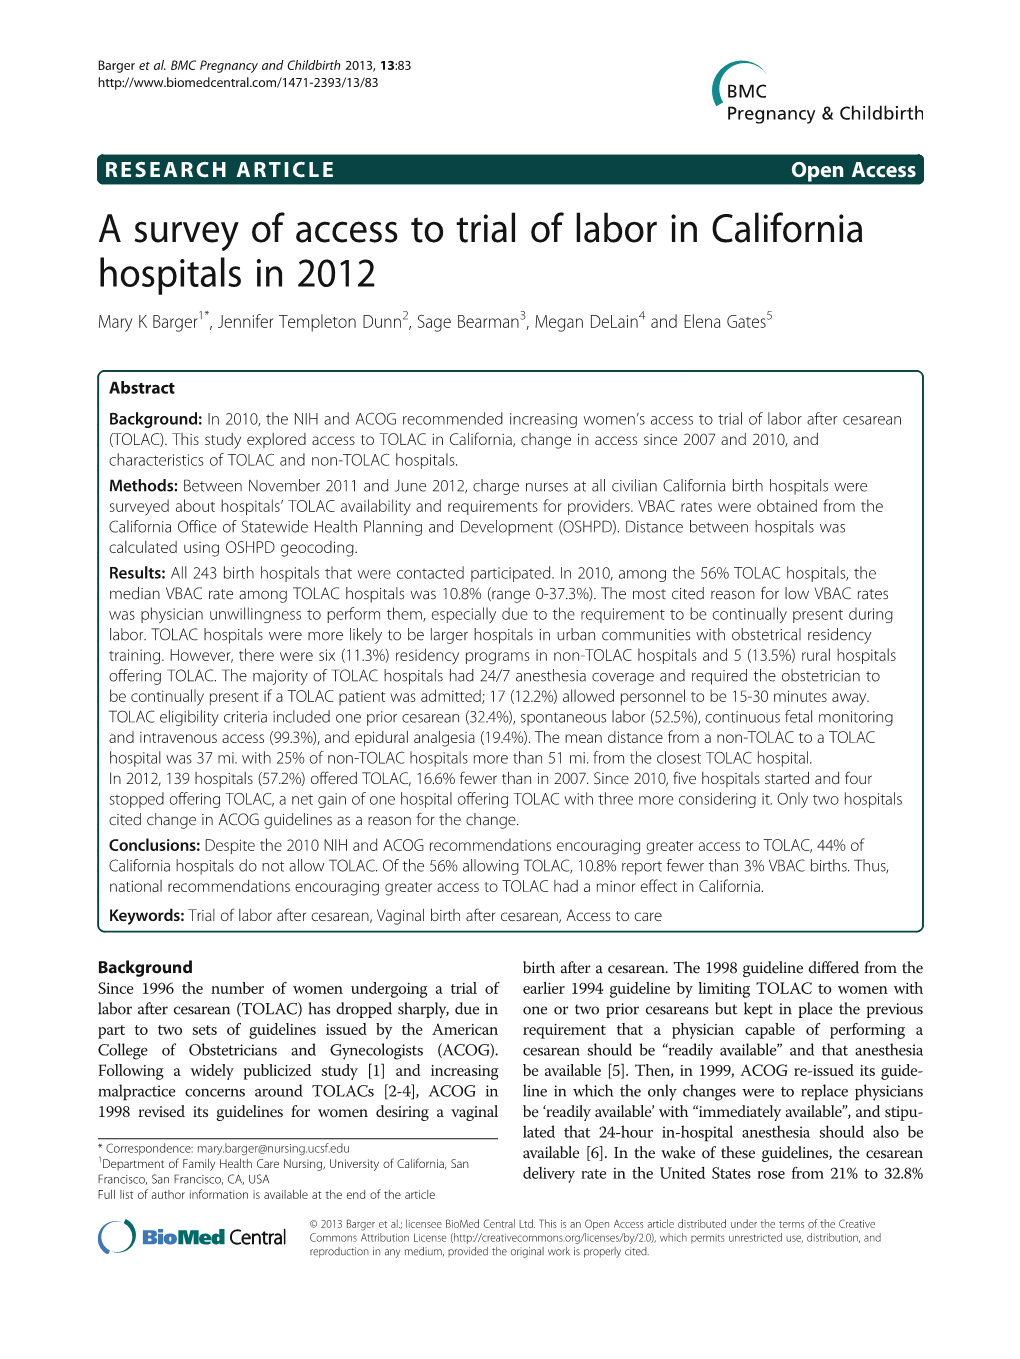 A Survey of Access to Trial of Labor in California Hospitals in 2012 Mary K Barger1*, Jennifer Templeton Dunn2, Sage Bearman3, Megan Delain4 and Elena Gates5